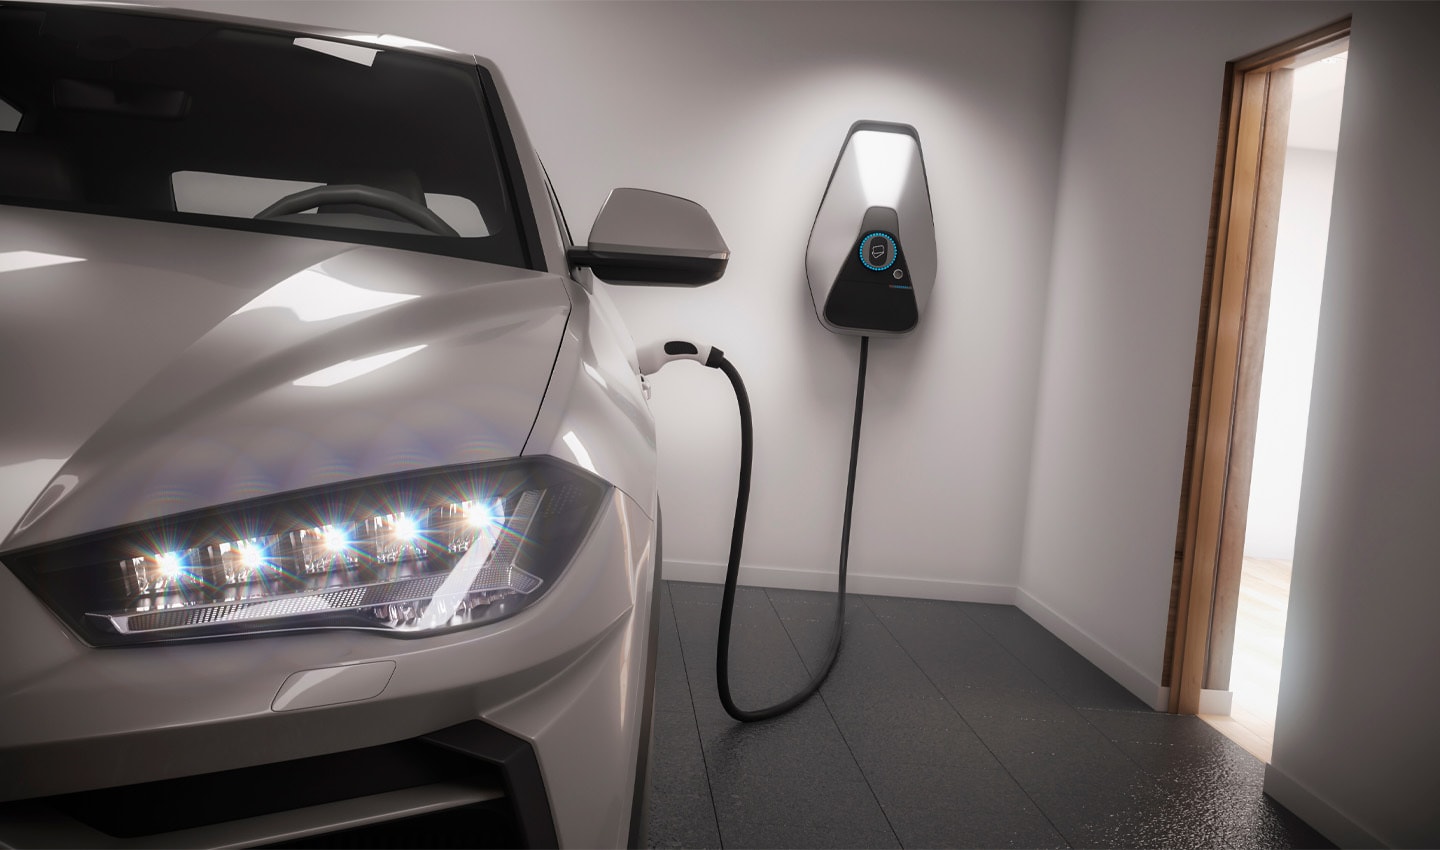 10 million EVs using bidirectional charging could power the entire UK.